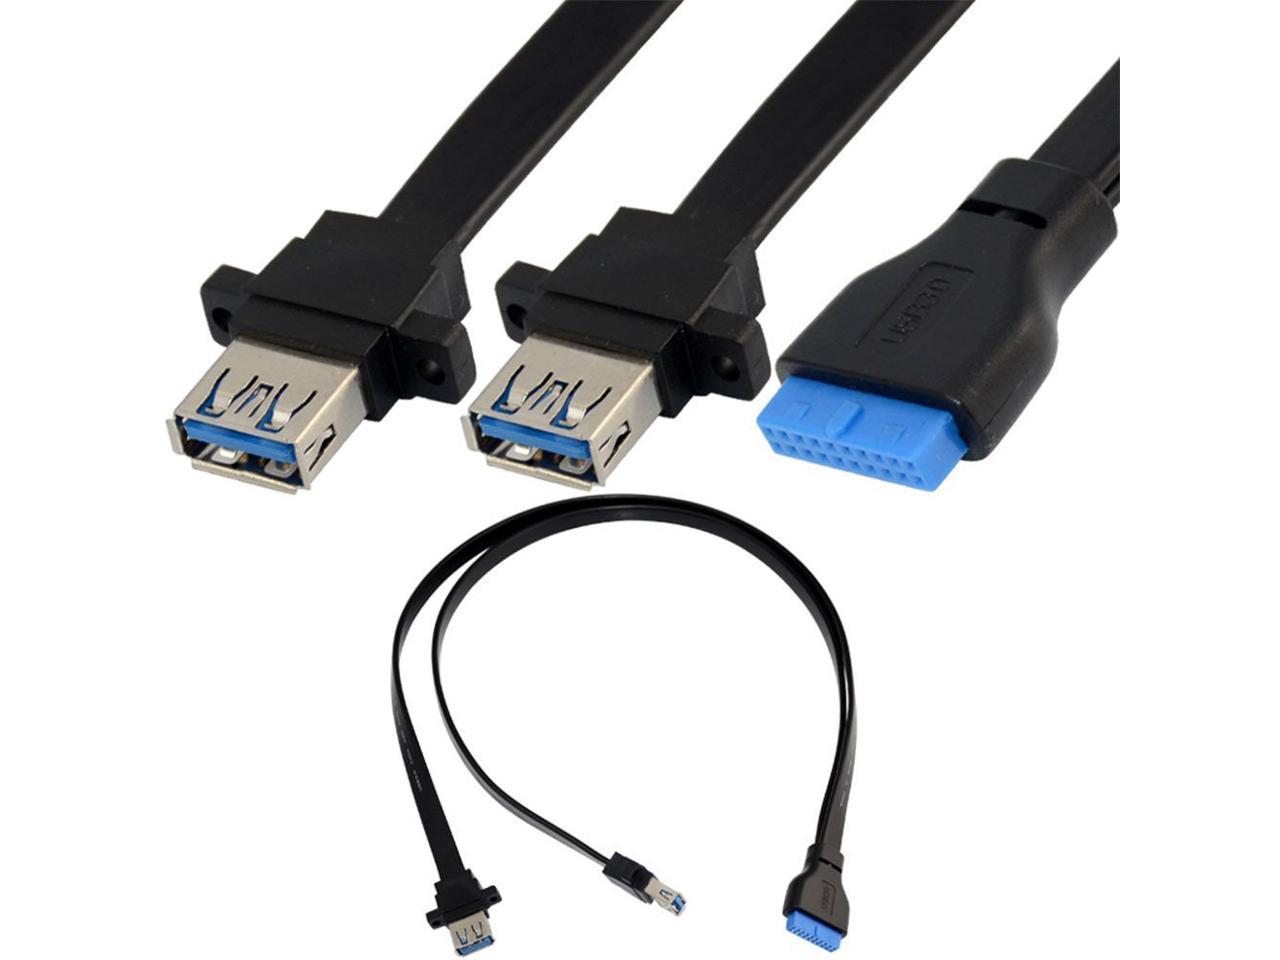 1m Cable Length: 0.3m 3m New - Computer Cables 1Pc High Speed Transparent Blue USB 2.0 Printer Cable Type A Male to Type B Male Dual Shielding for 0.3m 1.5m